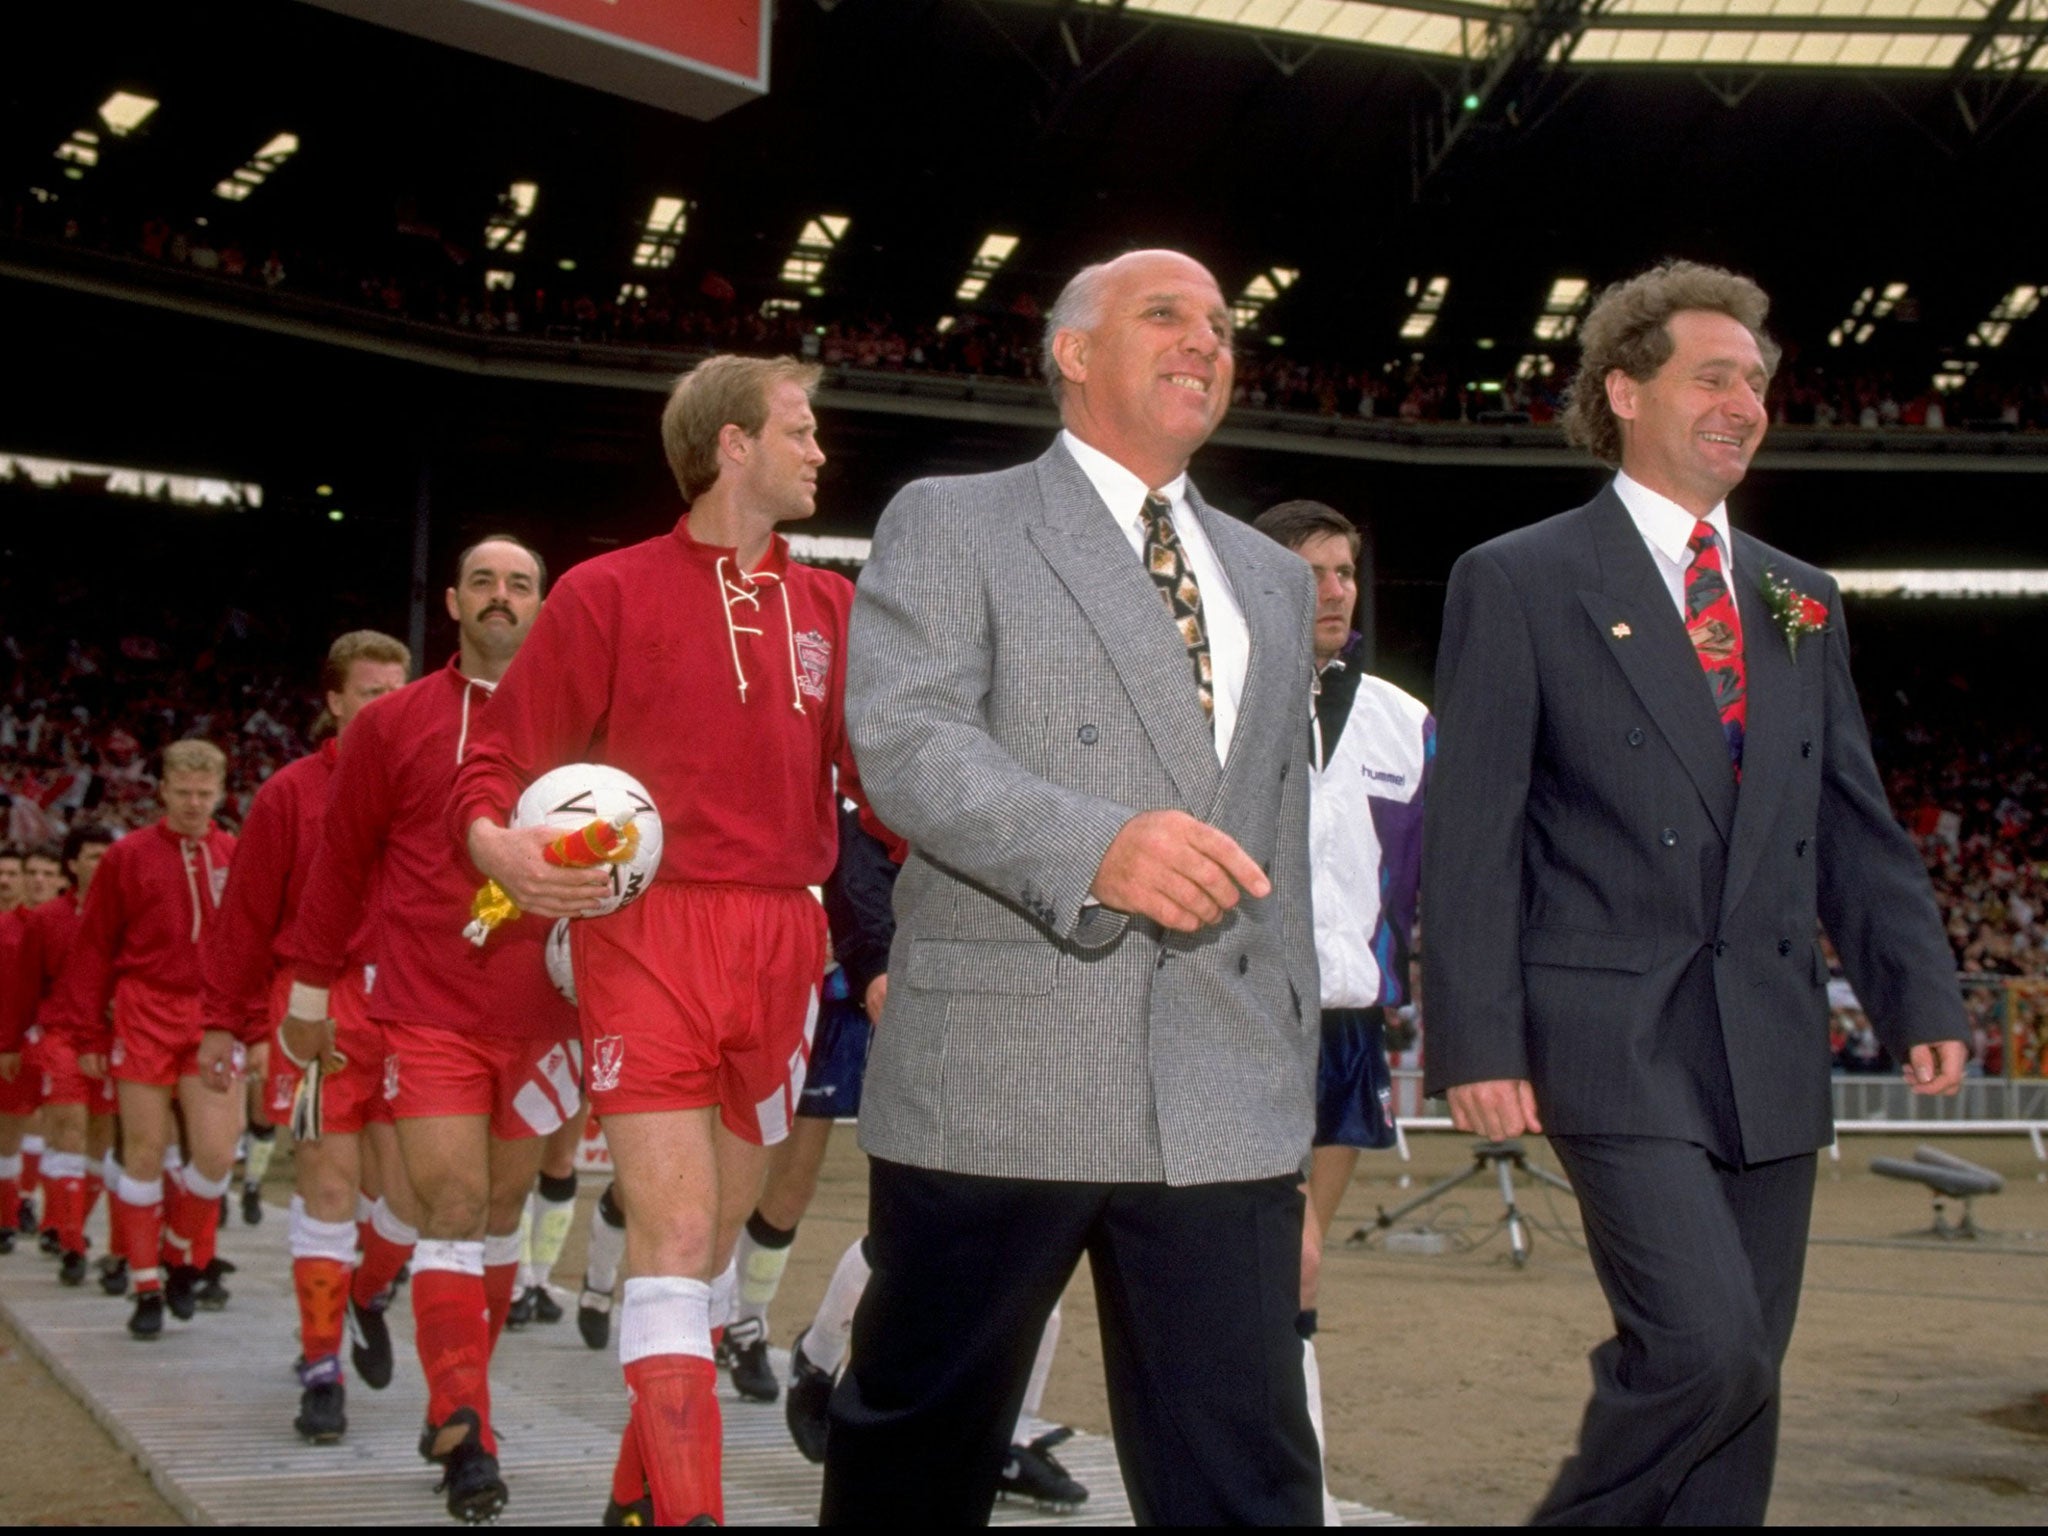 Moran as given the honour of leading Liverpool out for the 1992 FA Cup final